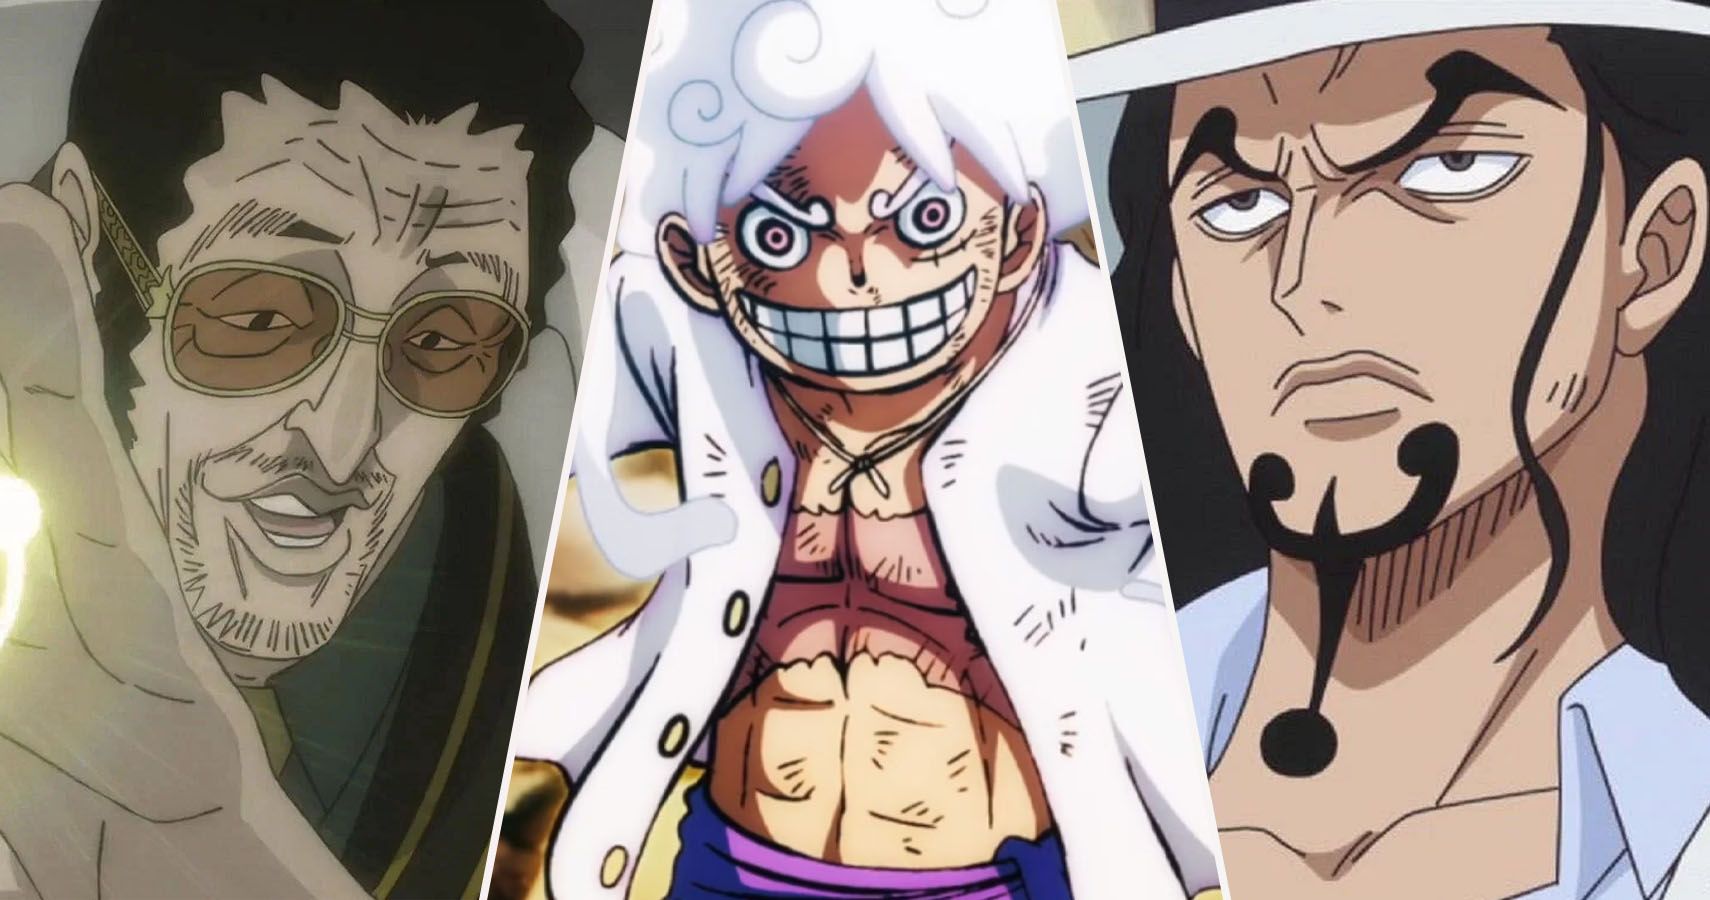 Kizaru, Gear 5 Luffy, and CP-0 Rob Lucci from One Piece